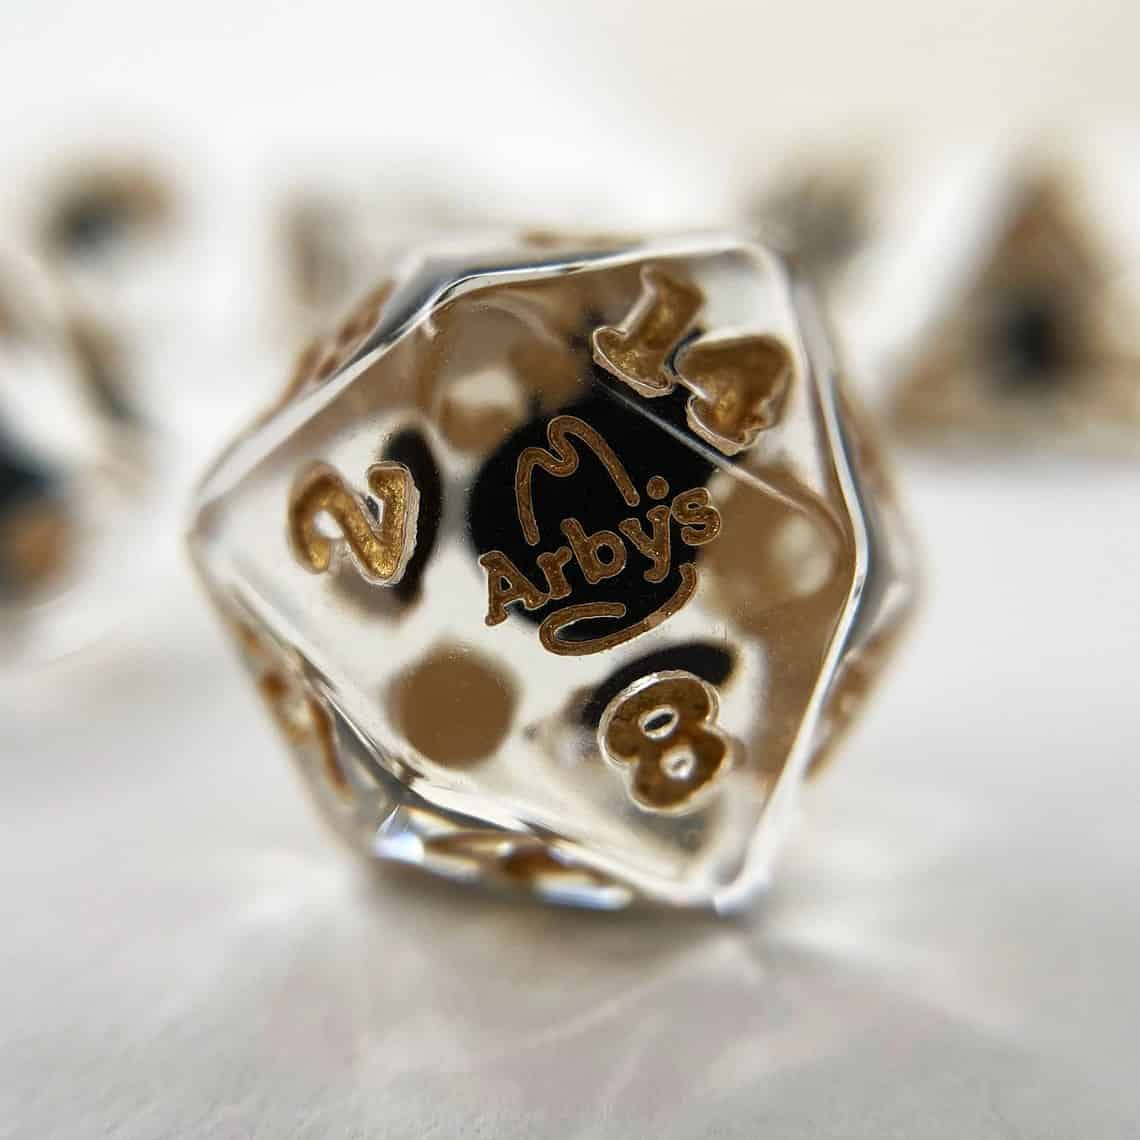 Arby’s Legendary Dungeons and Dragons Dice Set